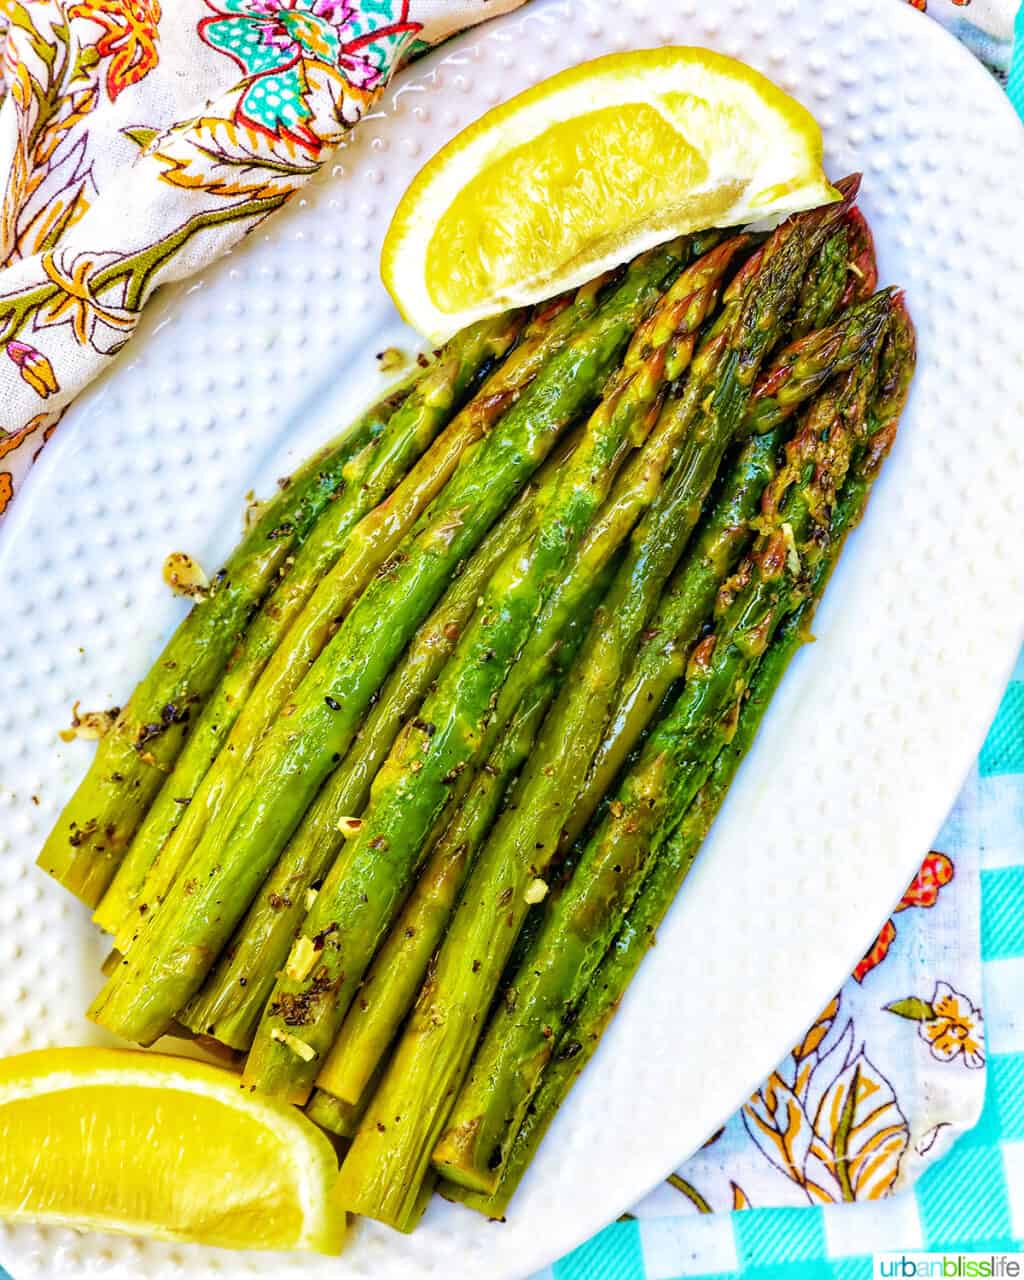 grilled asparagus with lemon wedges on a white plate and colorful napkin.